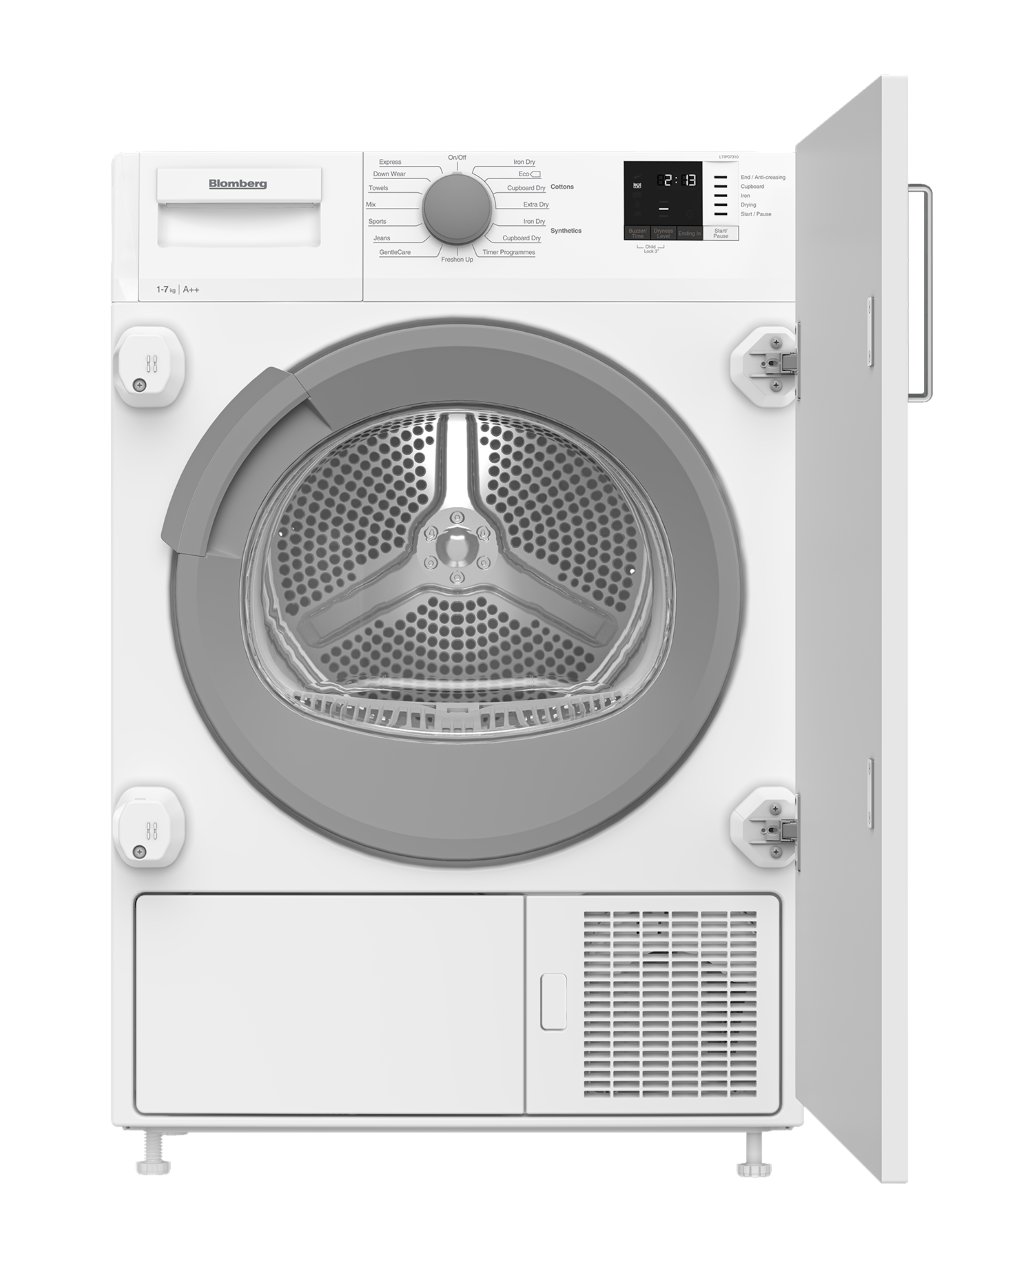 SECHE LINGE – BOSCH – Eco Recycle